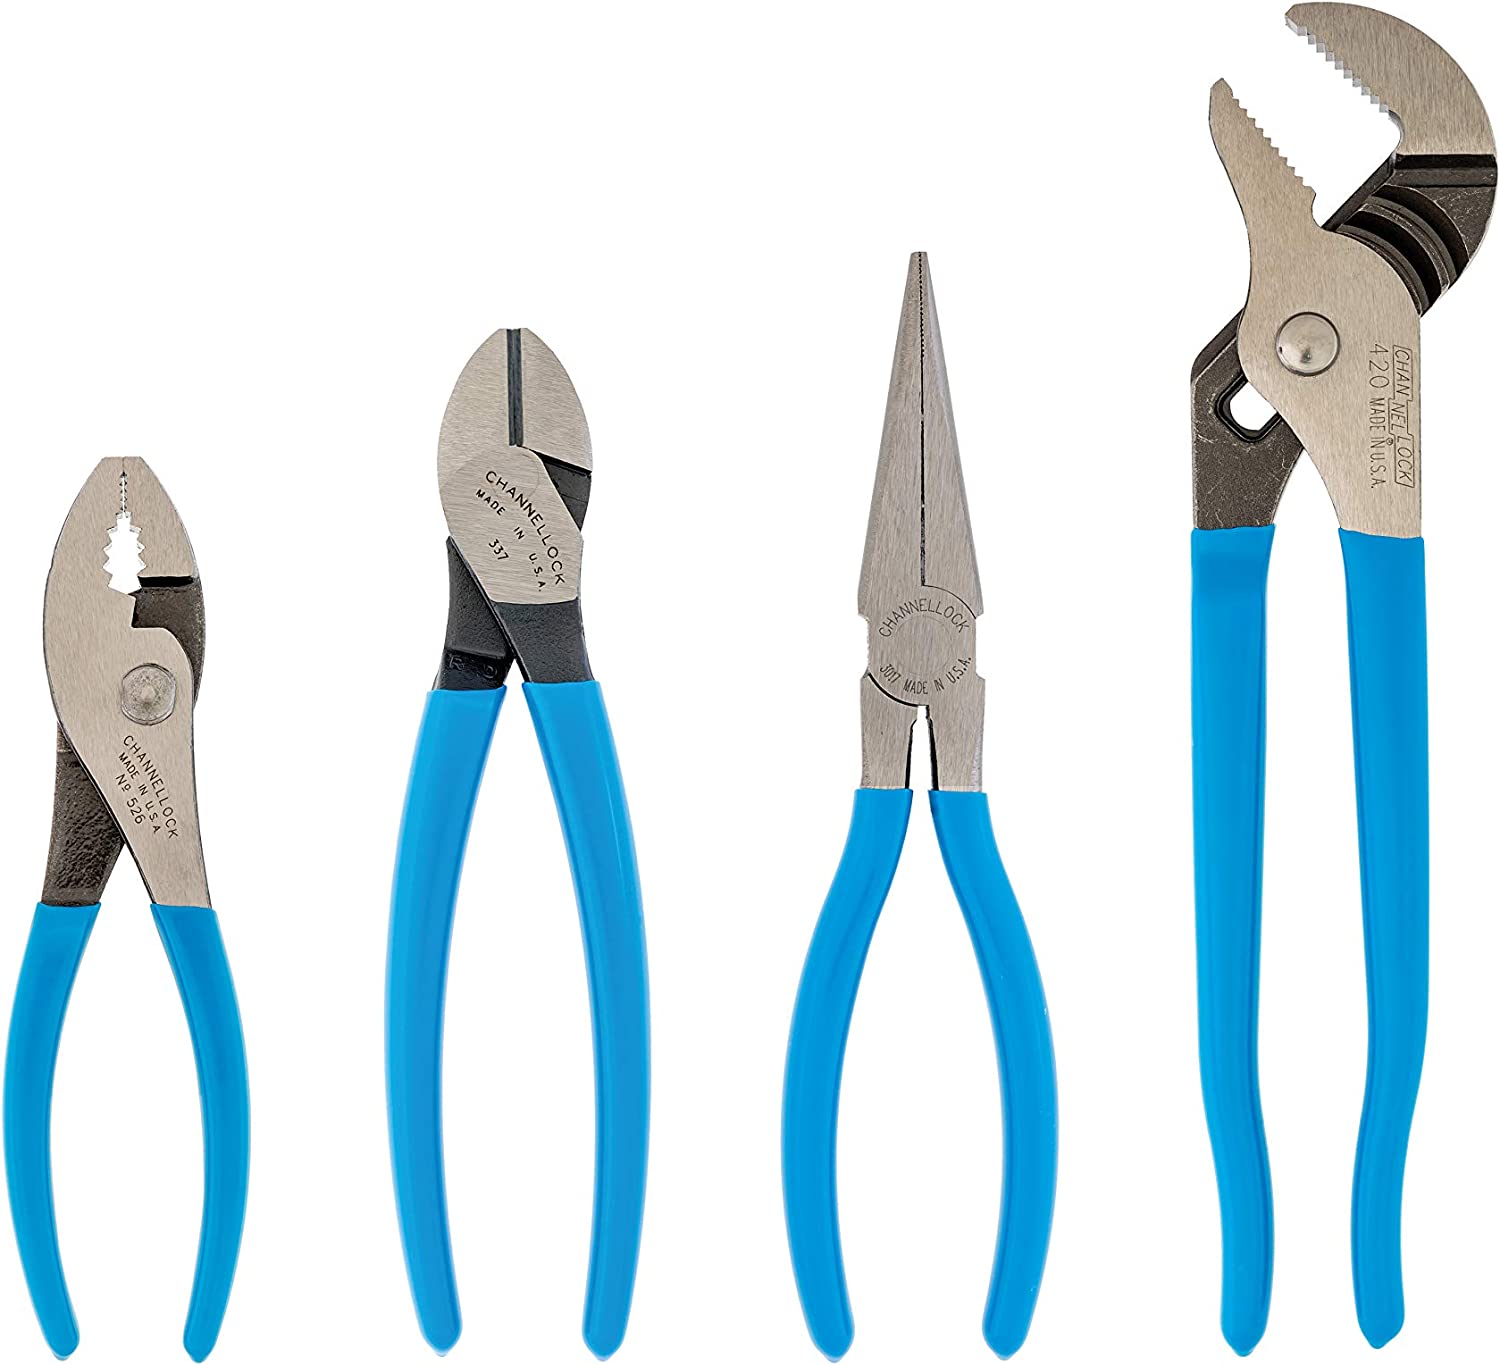 CHANNELLOCK HD-1 Ultimate 4-Piece Pliers Set amazon 36.96 free prime shipping $36.96